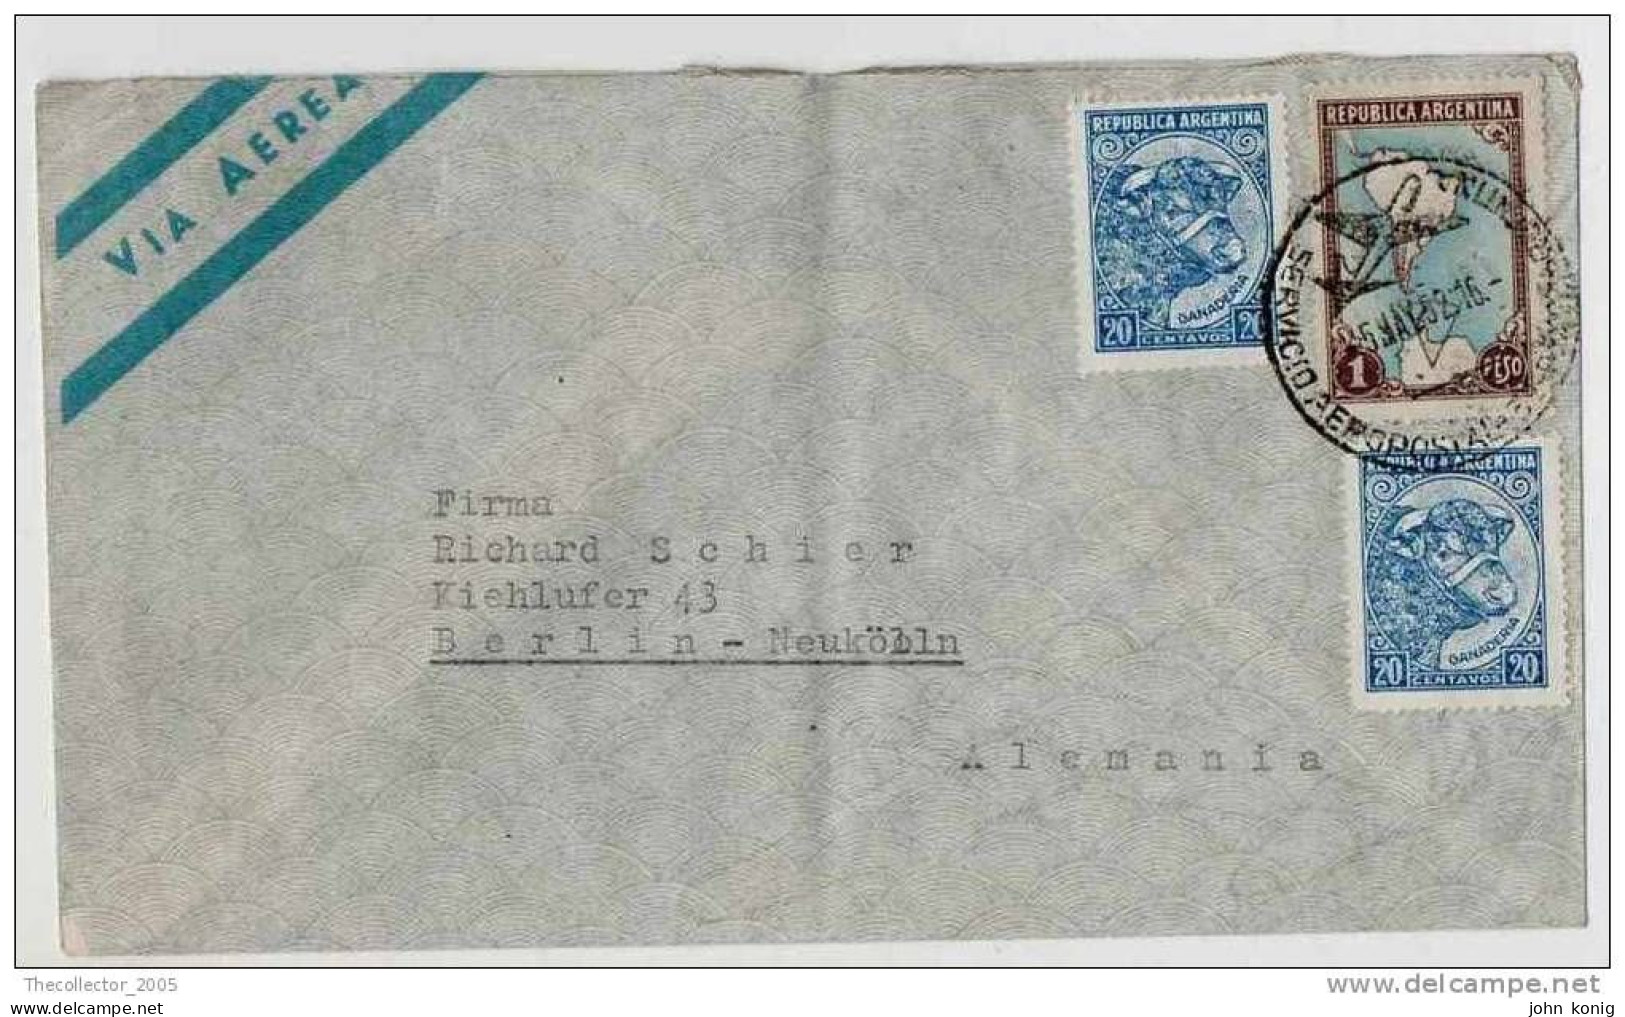 Lettera Busta Argentina-Argentinien Letter- Cover - Briefe- Posta Aerea Anni '50 (of '50s)-Air Mail-to Germany-Berlin - Luftpost